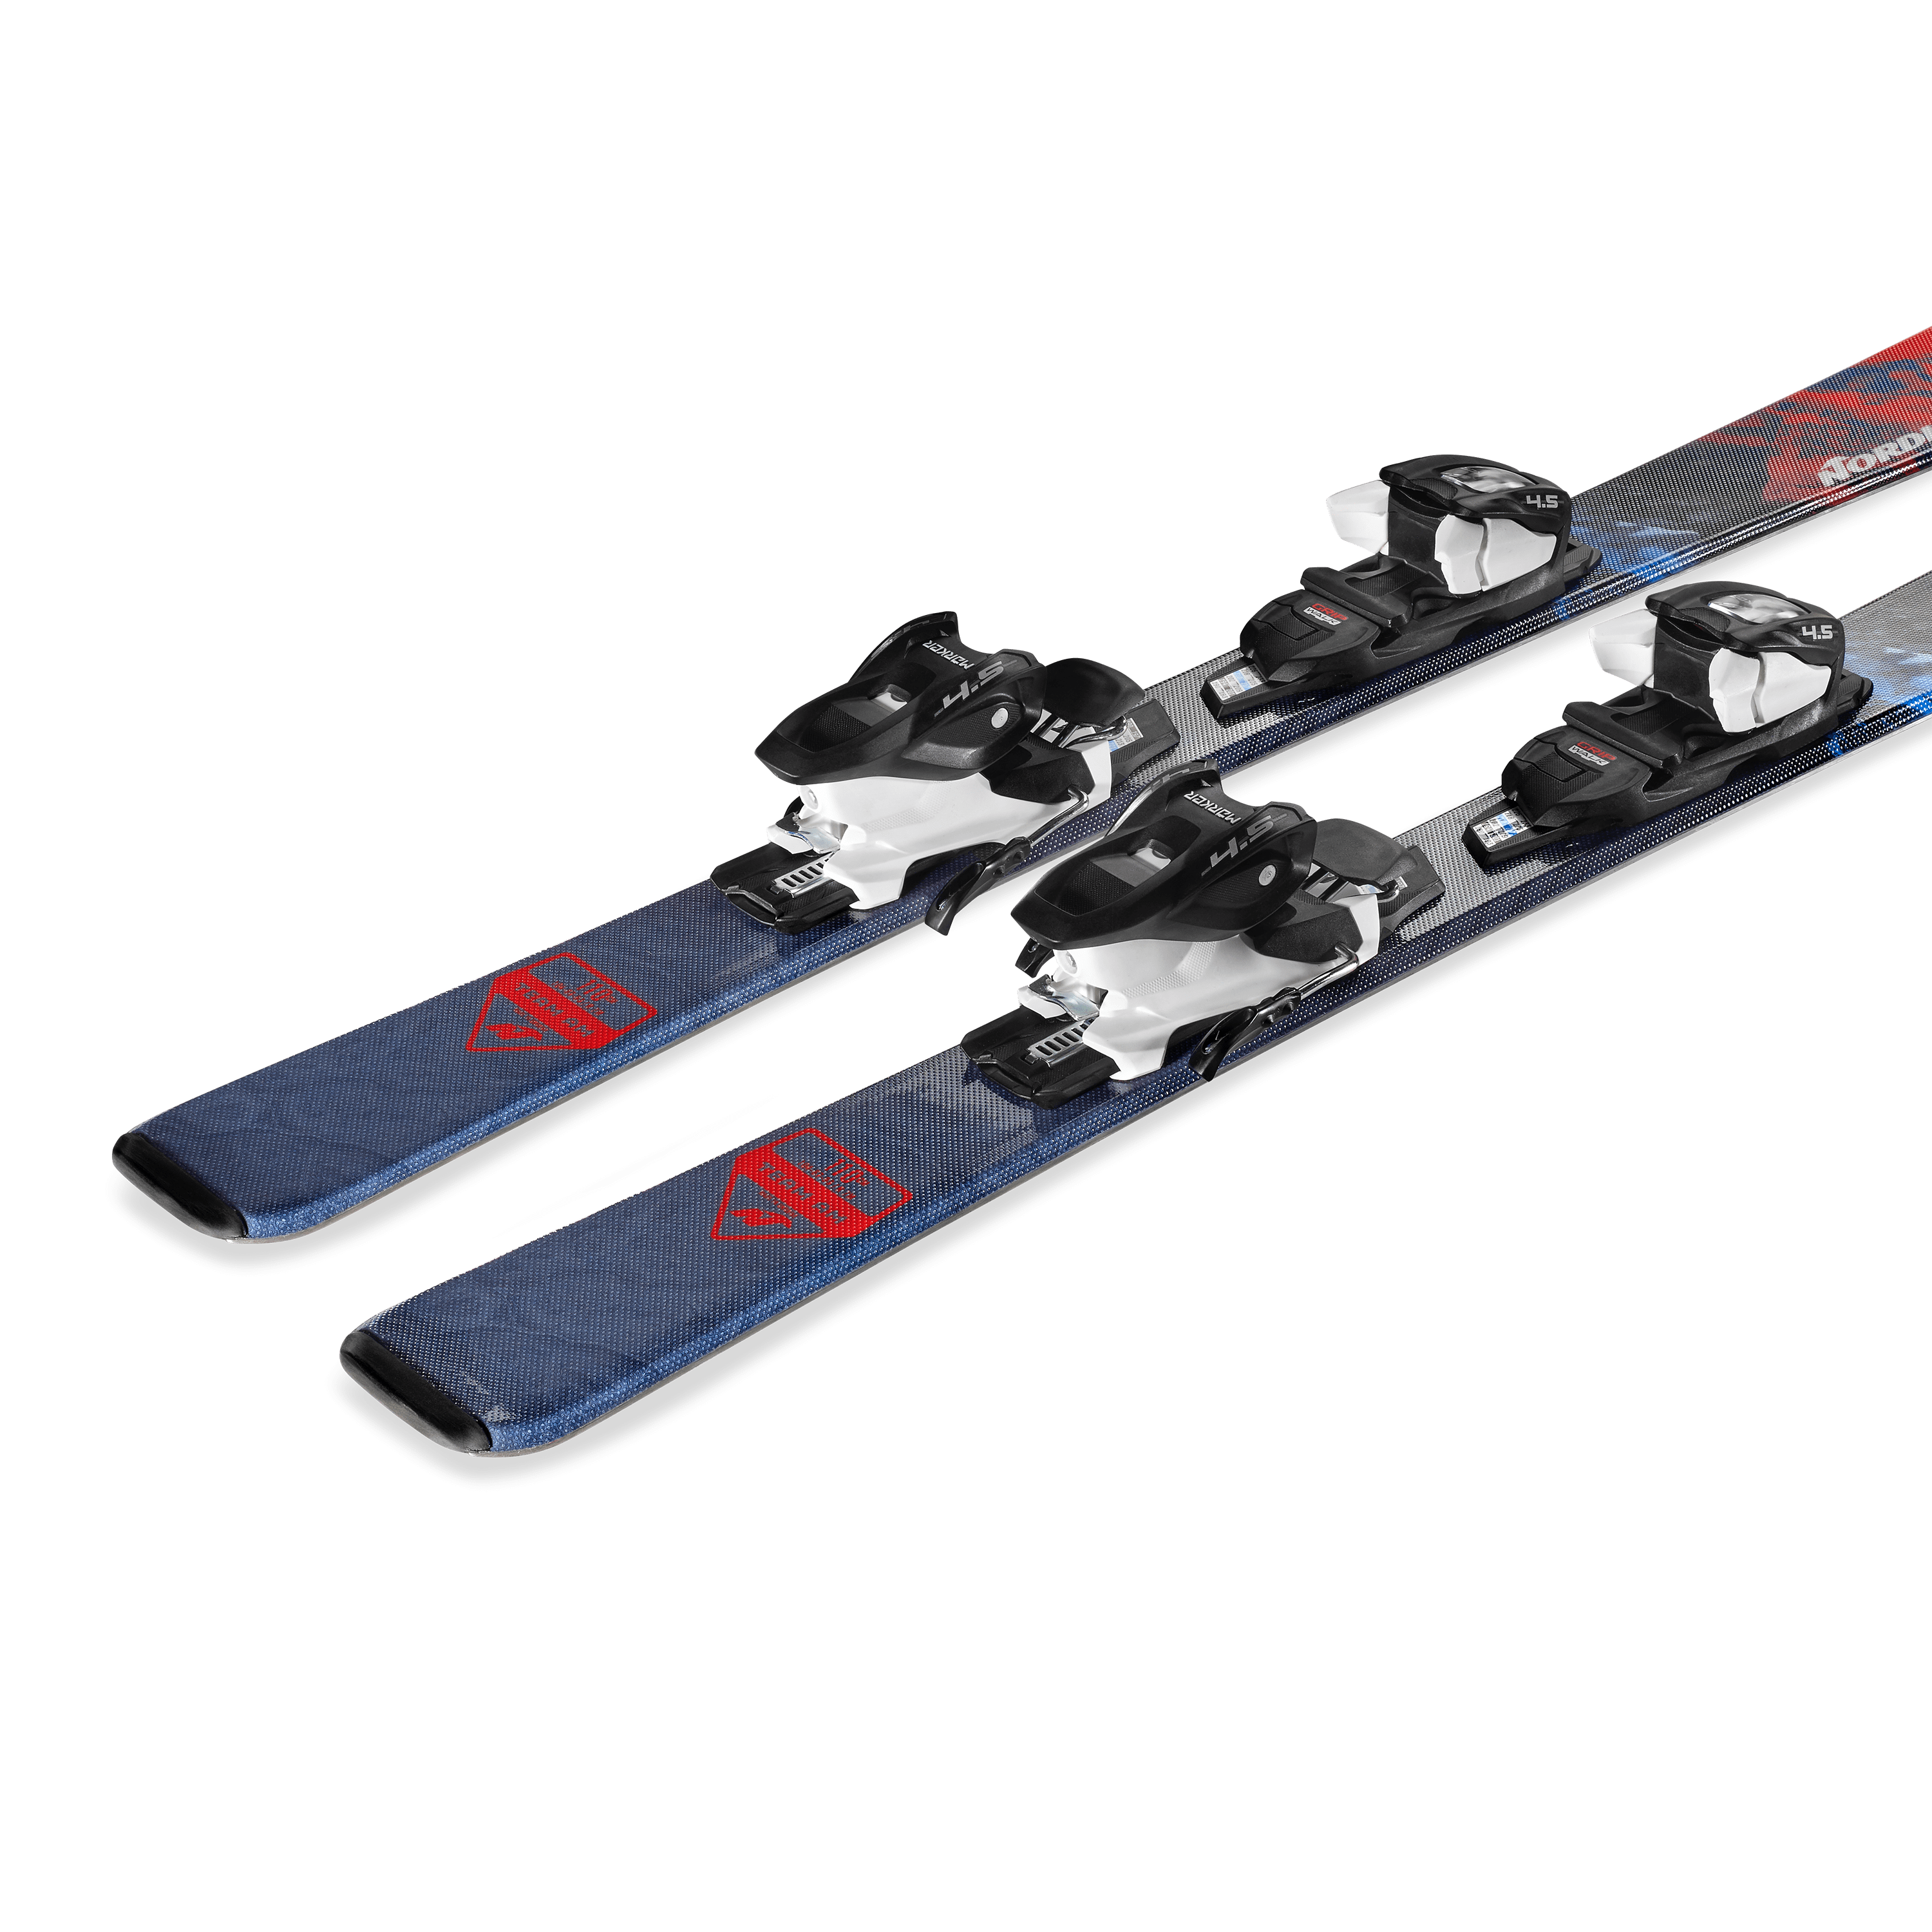 Picture of the Nordica Team am fdt (70-90) skis.